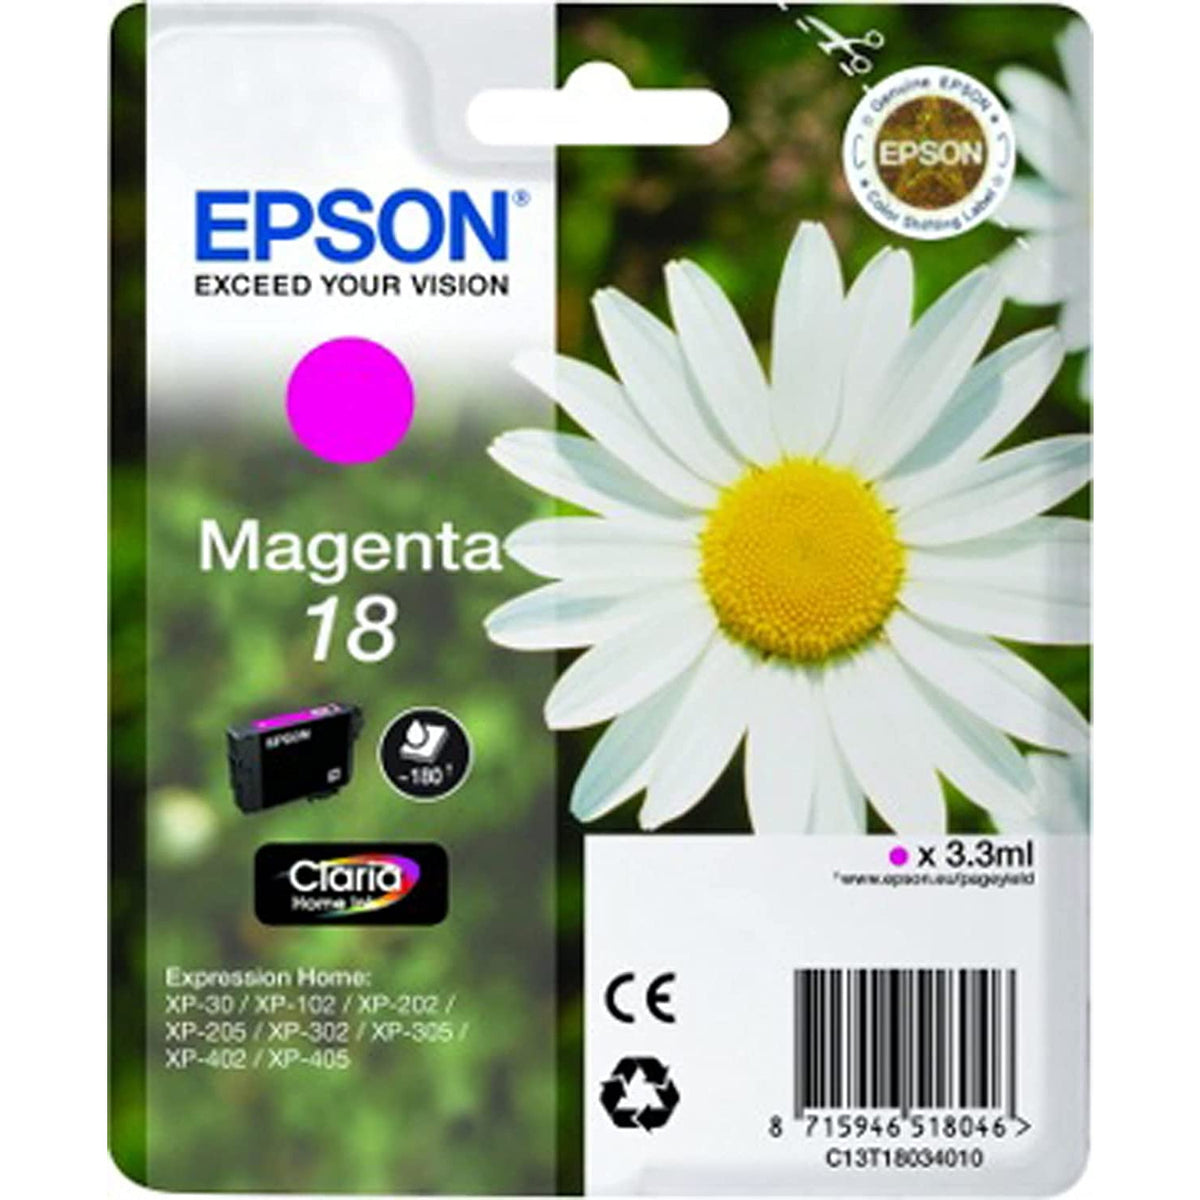 Epson 18 3.3ml Original Ink Cartridge - Magenta | SEPS1048 from Epson - DID Electrical